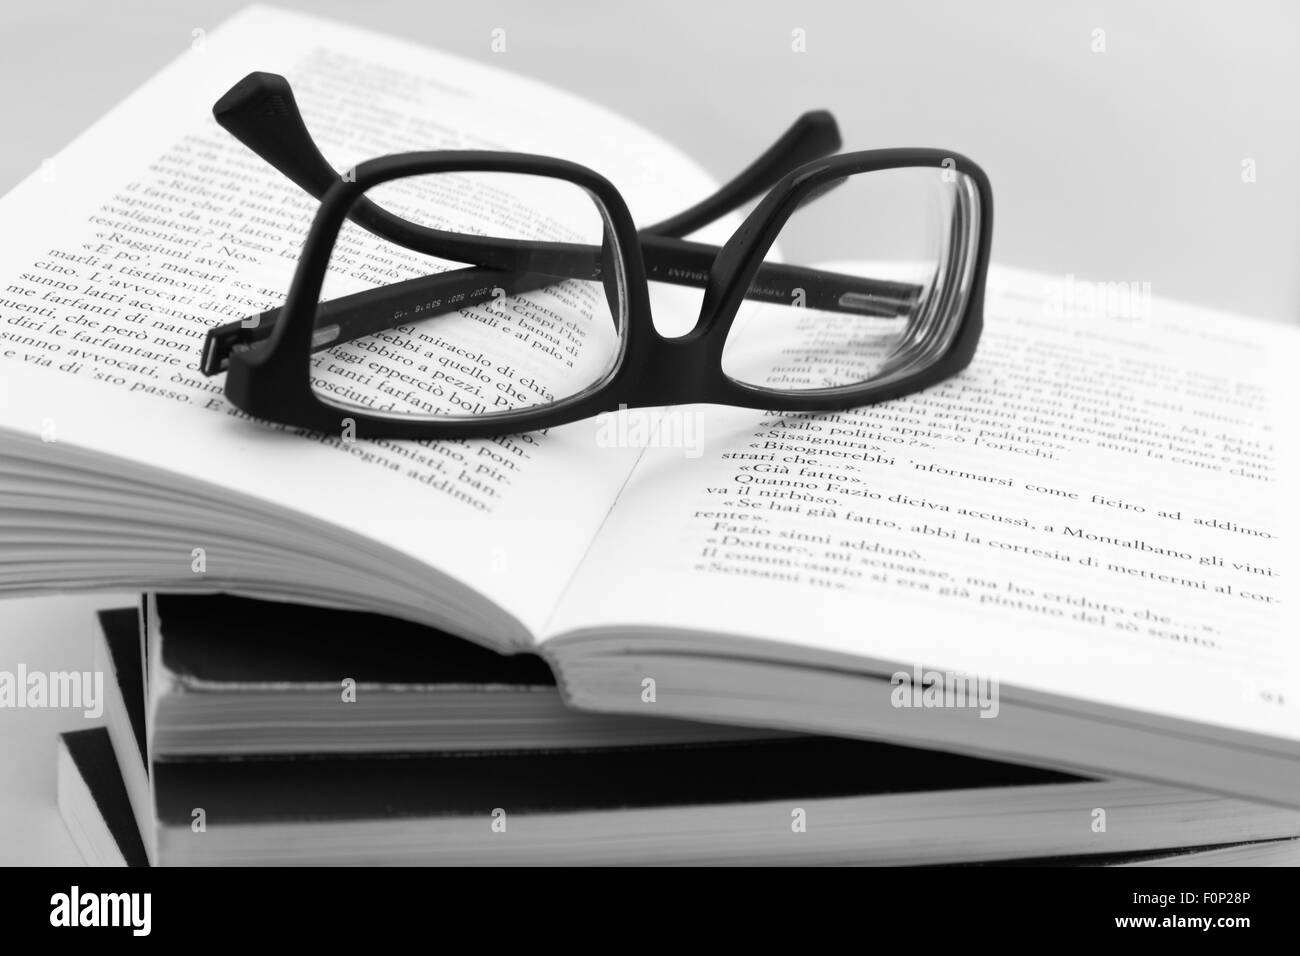 We are going to read books. Books and glasses on white background. Stock Photo